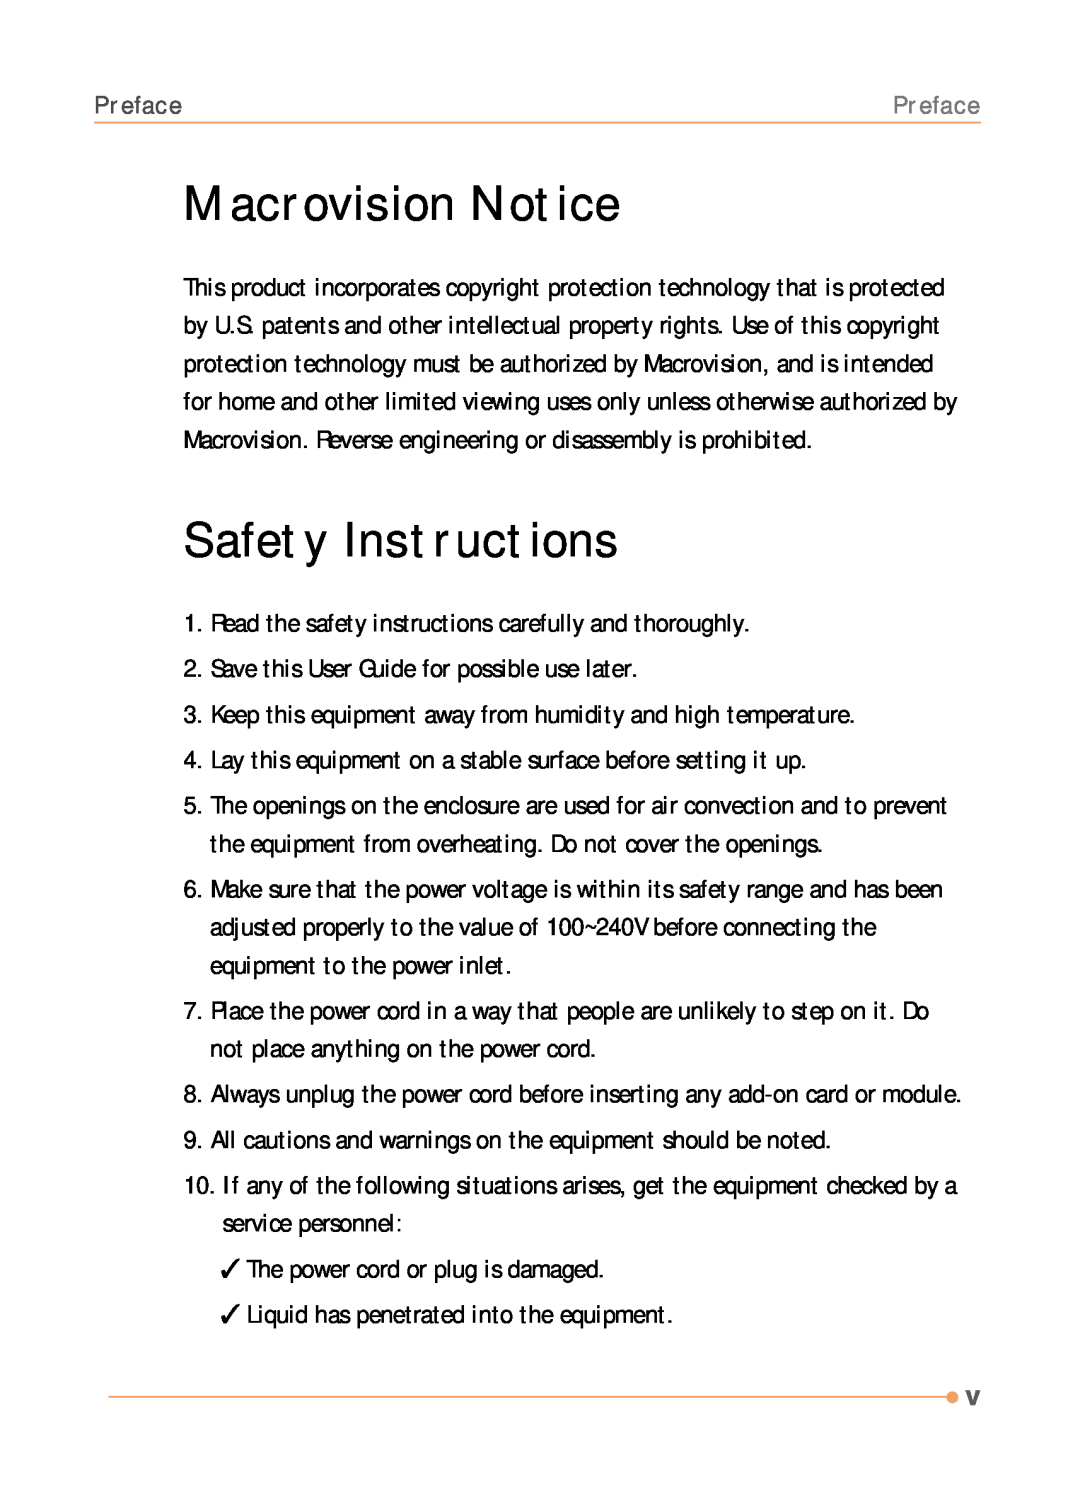 AVERATEC N1000 Series manual Macrovision Notice, Safety Instructions 